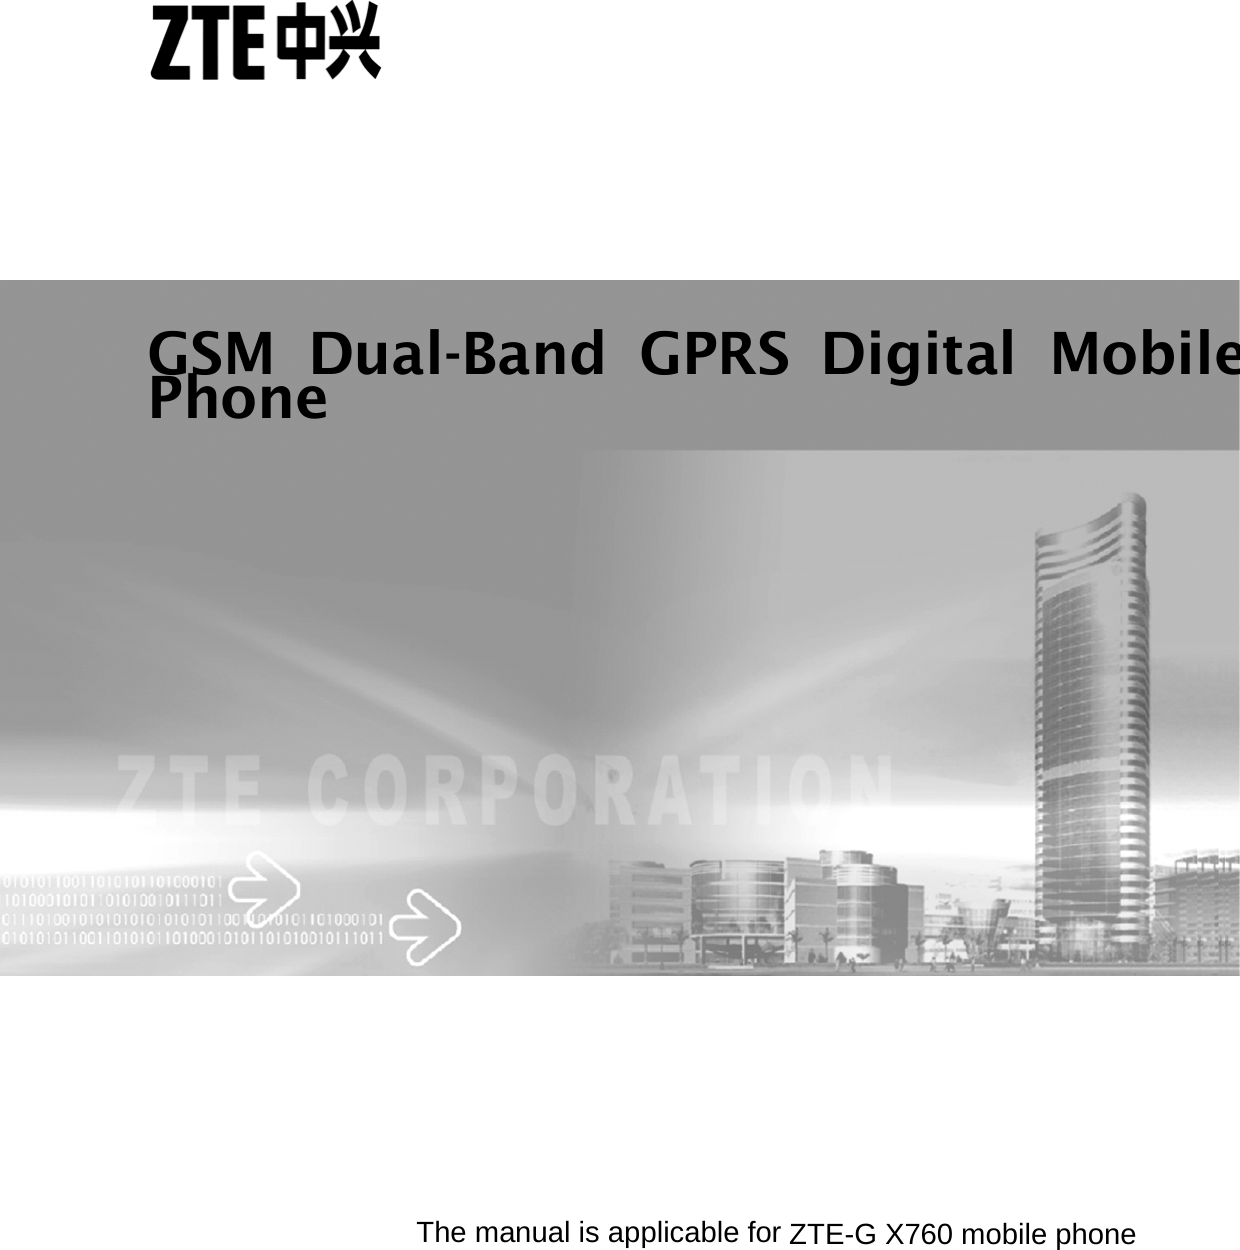          The manual is applicable for ZTE-G X760 mobile phone GSM Dual-Band GPRS Digital MobilePhone 